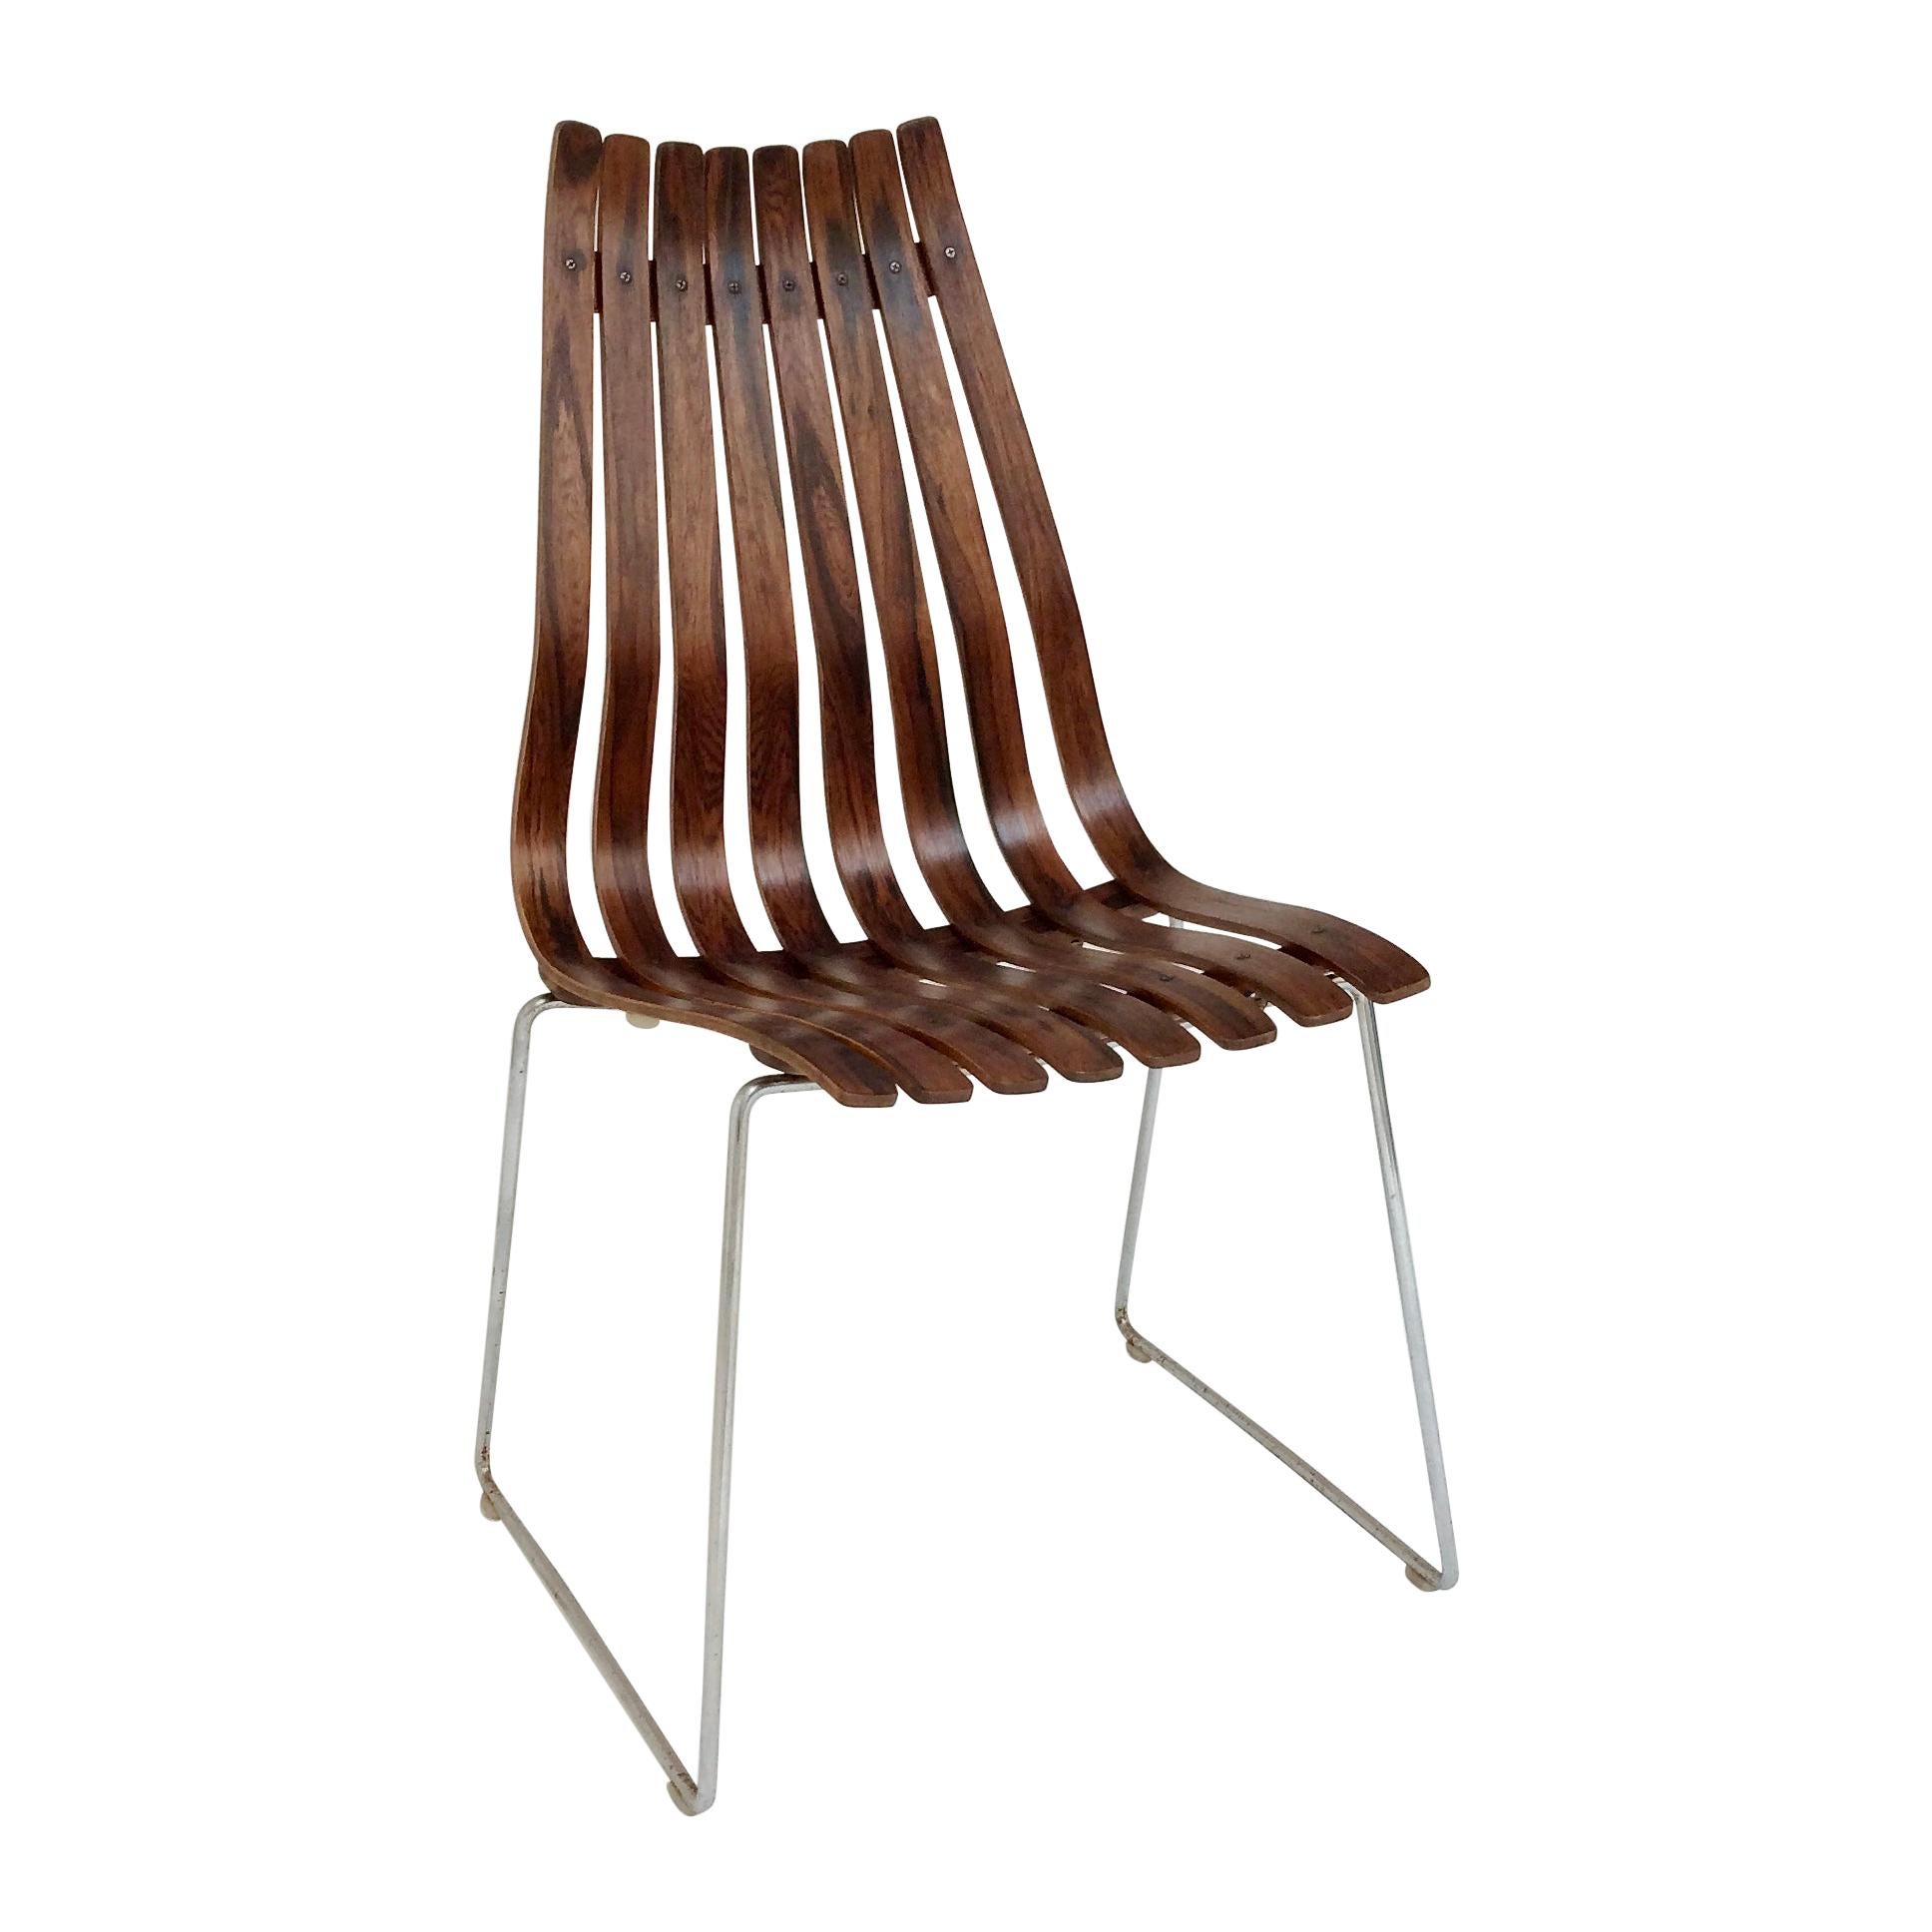 Hans Brattrud Scandia Chair for Hove Mobler, circa 1956, Norway